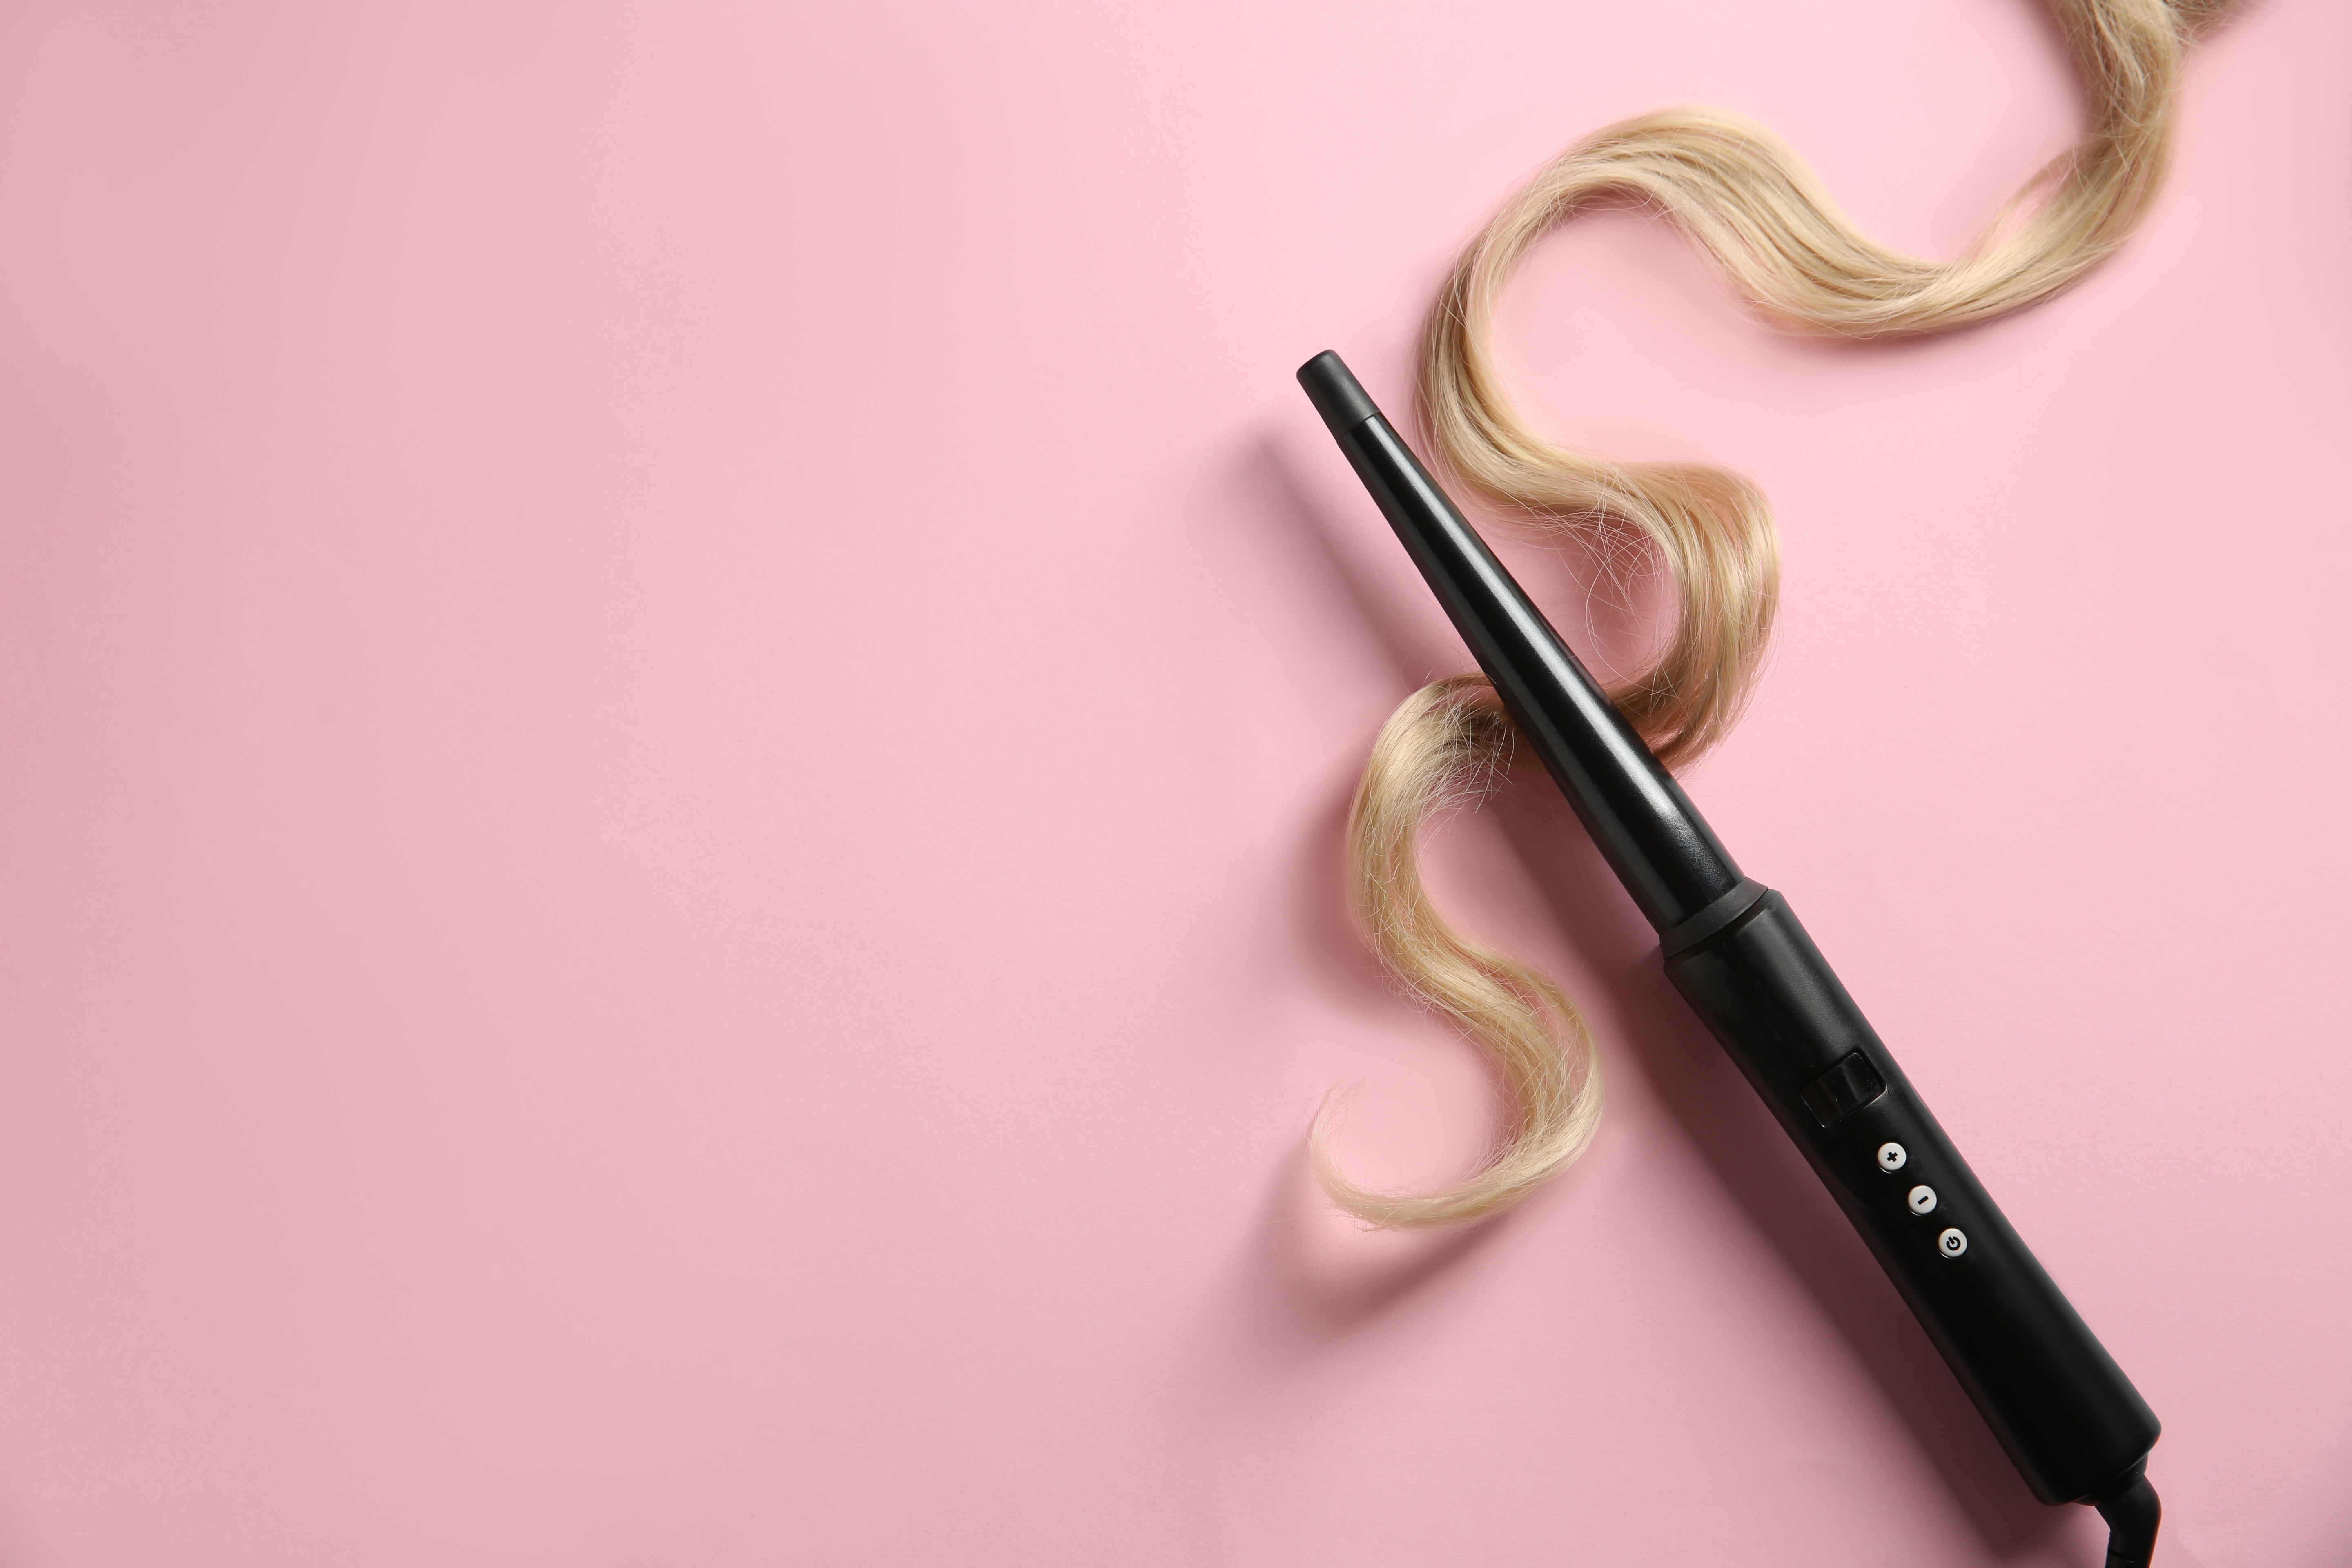 Curling wand and blonde hair set on a pink background